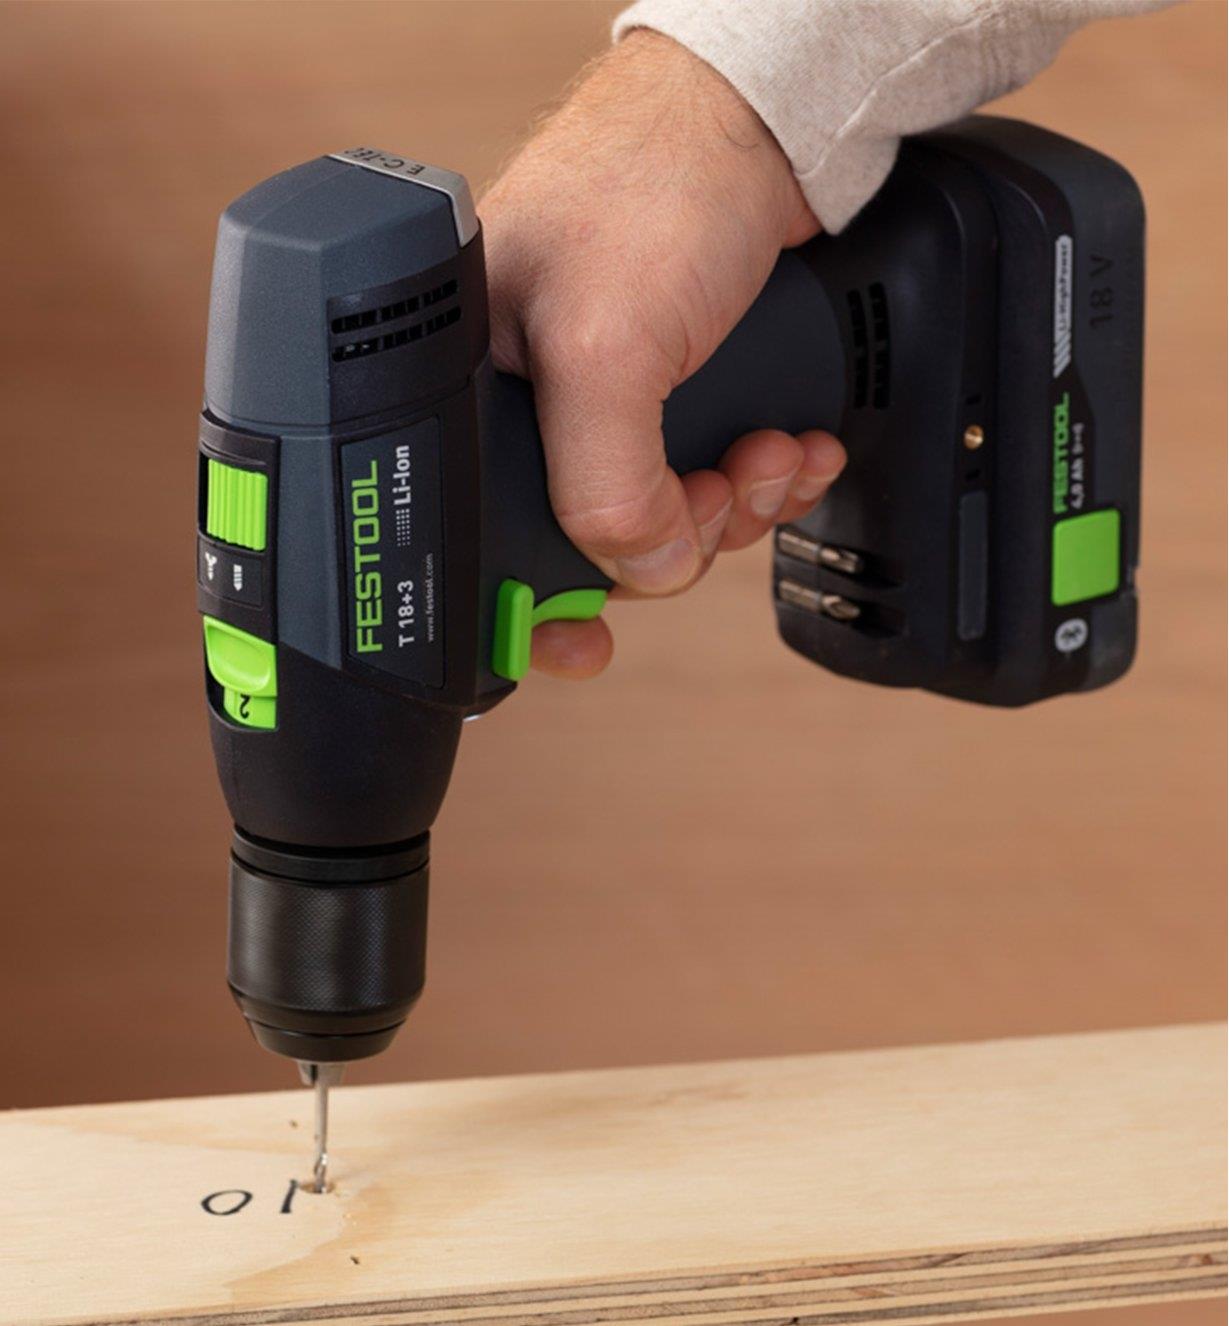 Drilling a hole into a piece of wood using the Festool T18+3 Easy cordless drill equipped with the 4.0 Ah battery